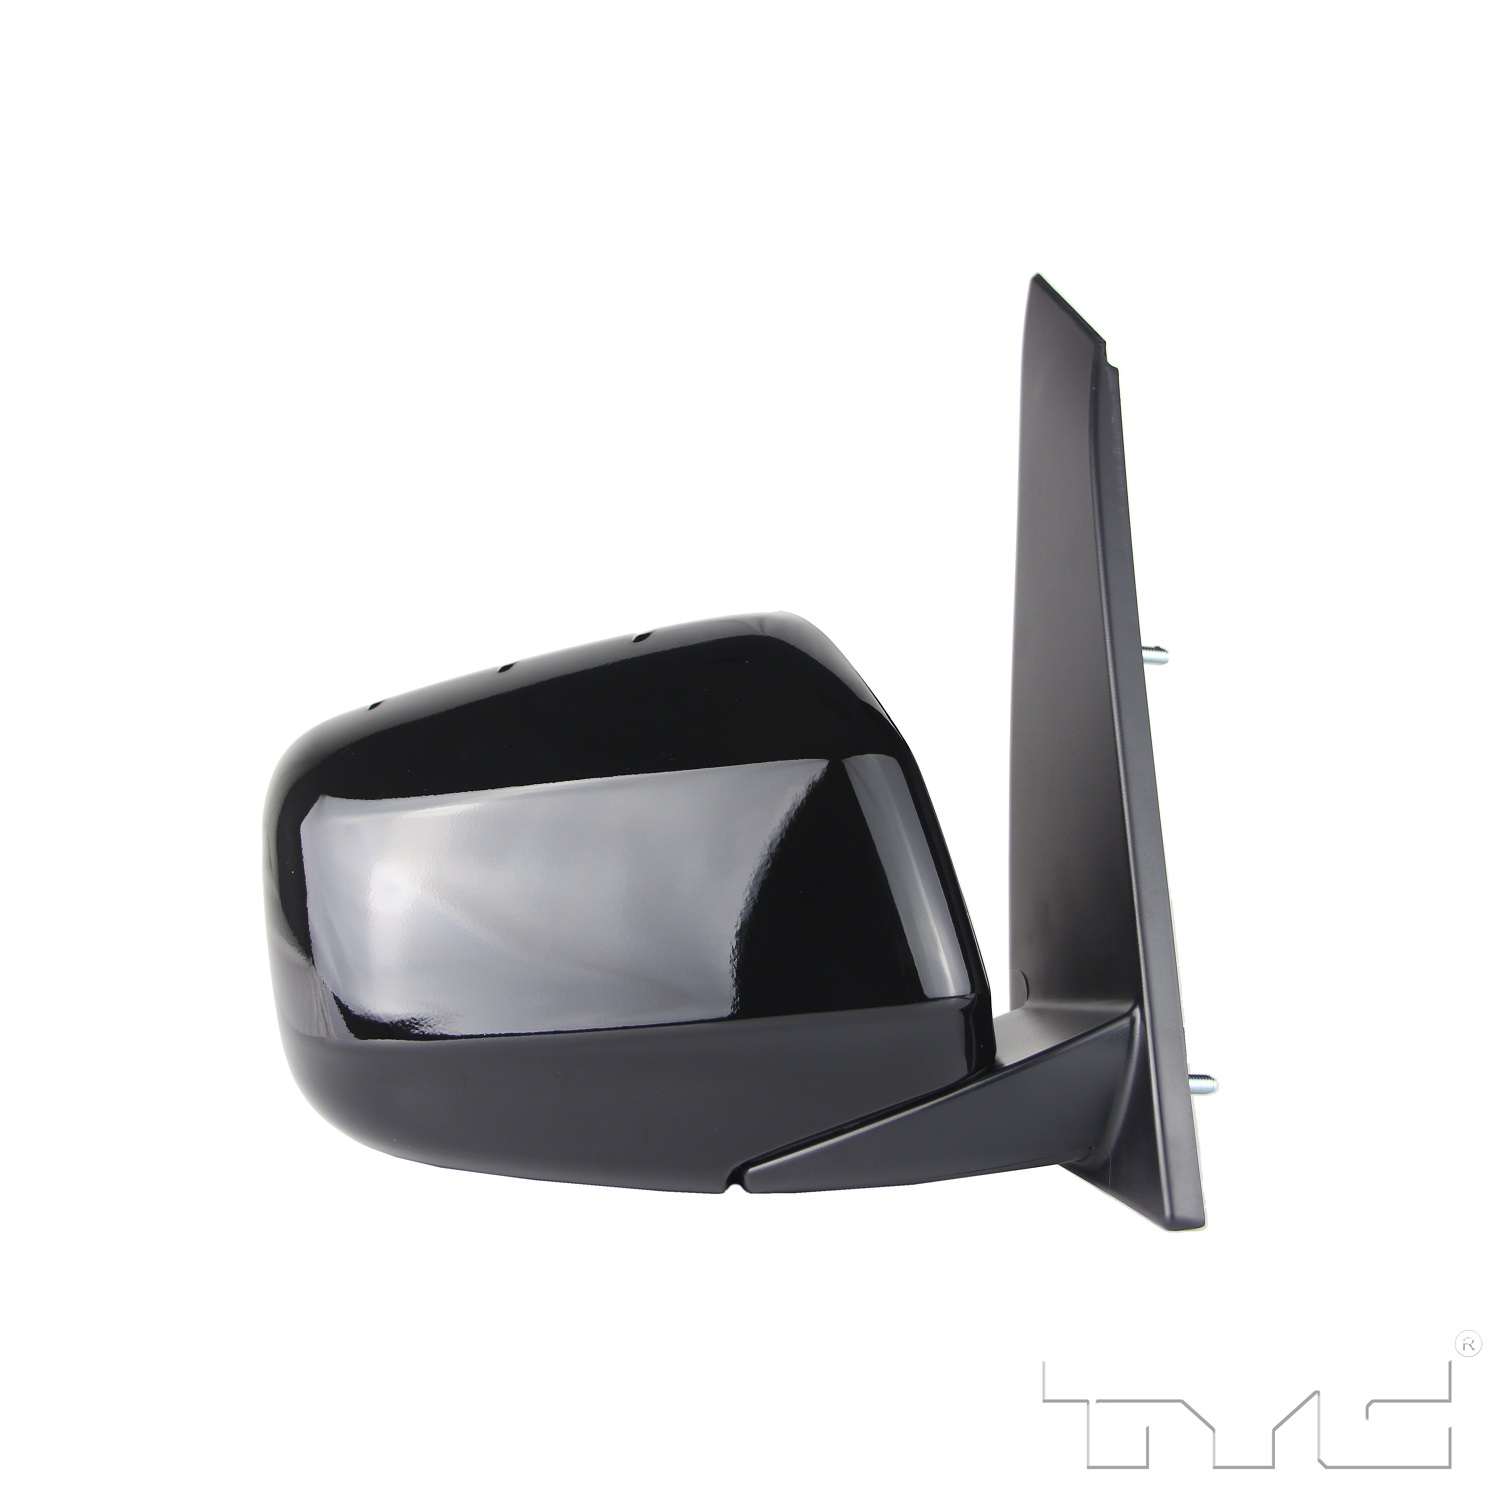 Aftermarket MIRRORS for HONDA - ODYSSEY, ODYSSEY,11-13,RT Mirror outside rear view